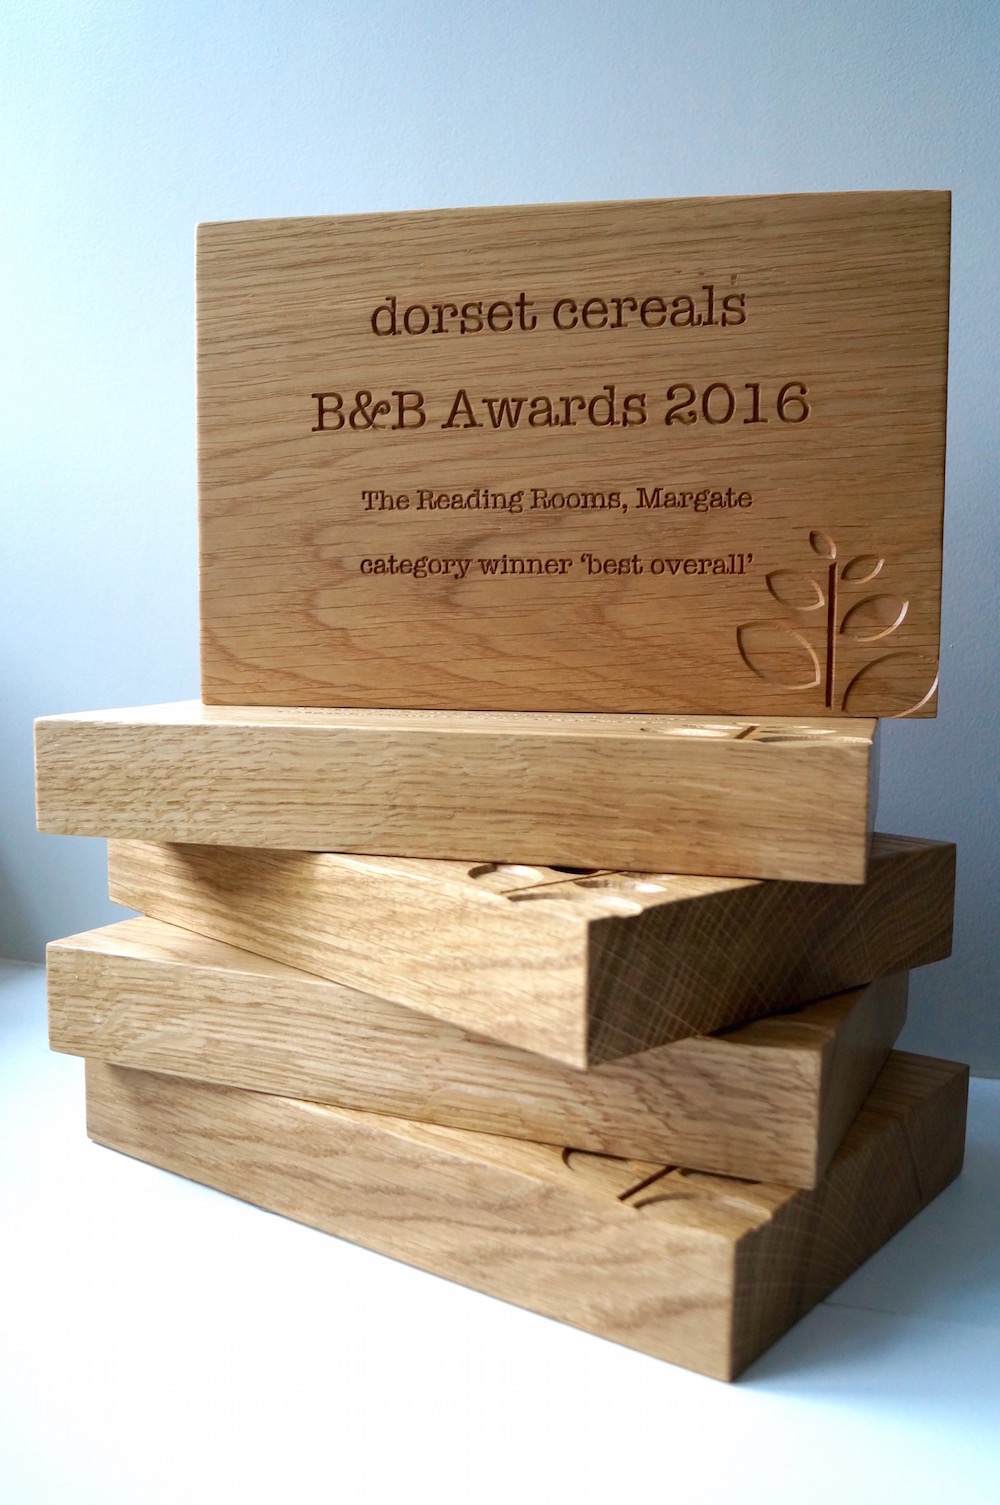 personalised-award-plaques-dorset-cereals-makemesomethingspecial.com